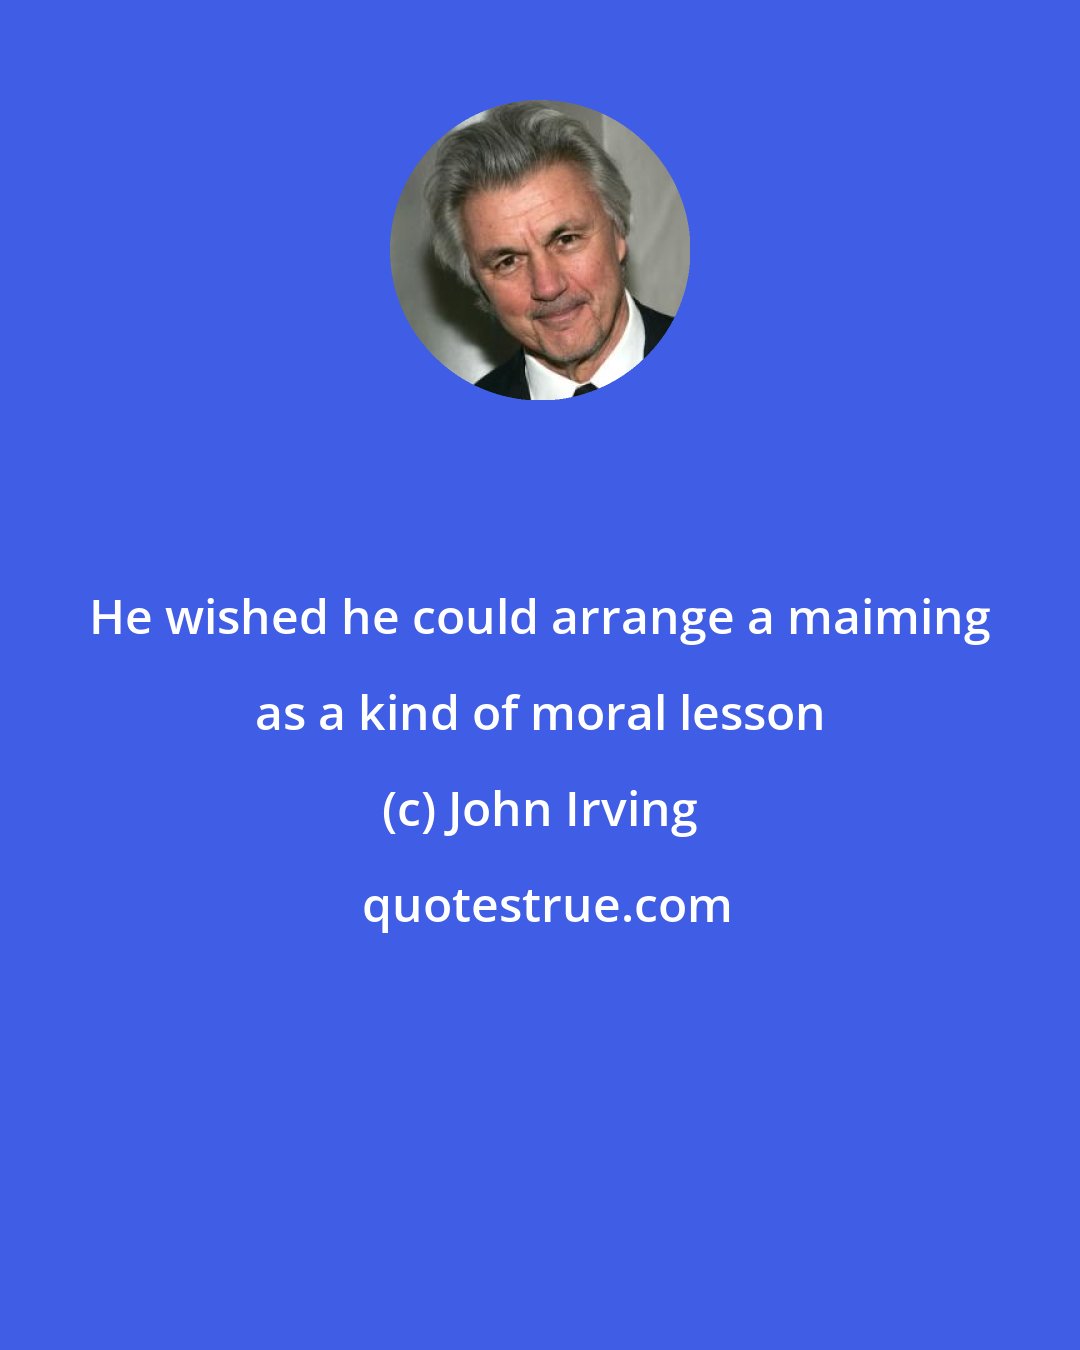 John Irving: He wished he could arrange a maiming as a kind of moral lesson